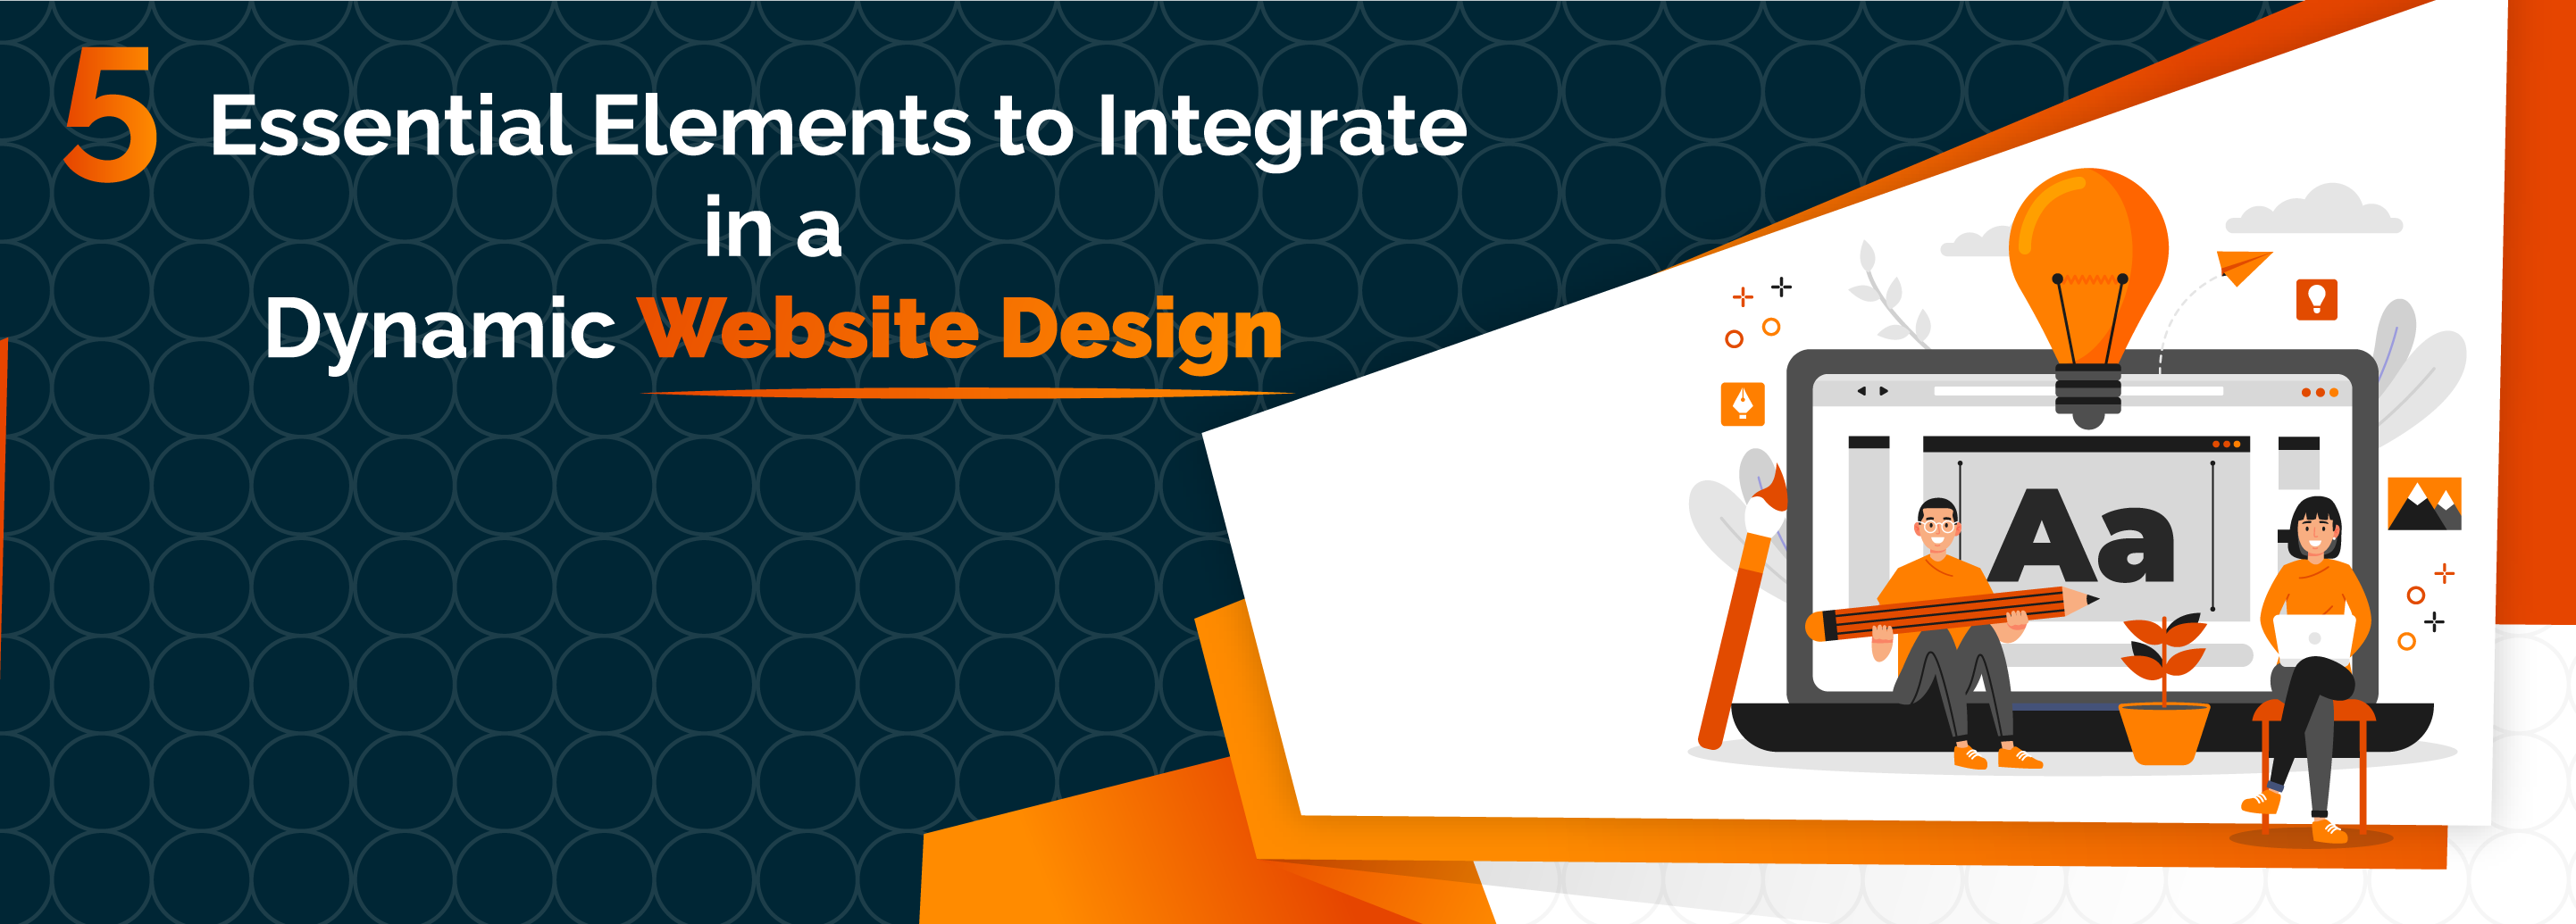 5 Critical Components of a Dynamic Website Design